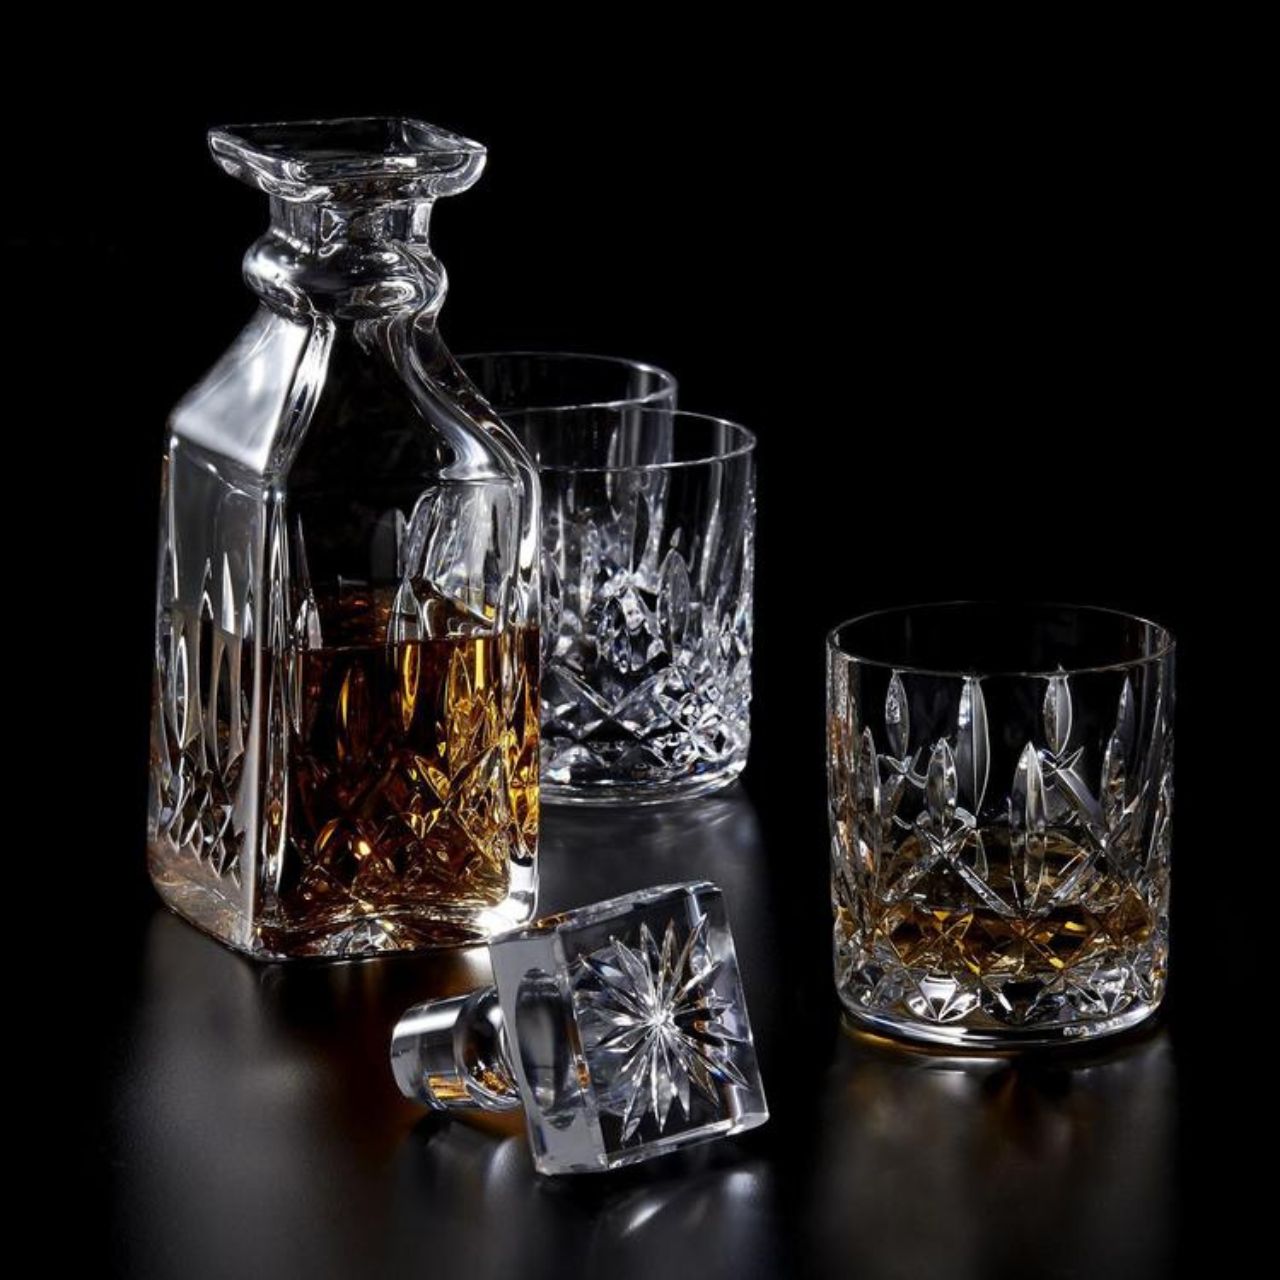 Waterford Crystal Lismore Square Decanter   Proudly pour your favourite single malt from this charming Lismore 26oz Square Decanter and become a connoisseur. With its striking square profile, this traditional crystal whiskey decanter will look magnificent as it highlights the rich colour of its contents, radiating luxury and excellence as you entertain guests or savour something that is too good to share.